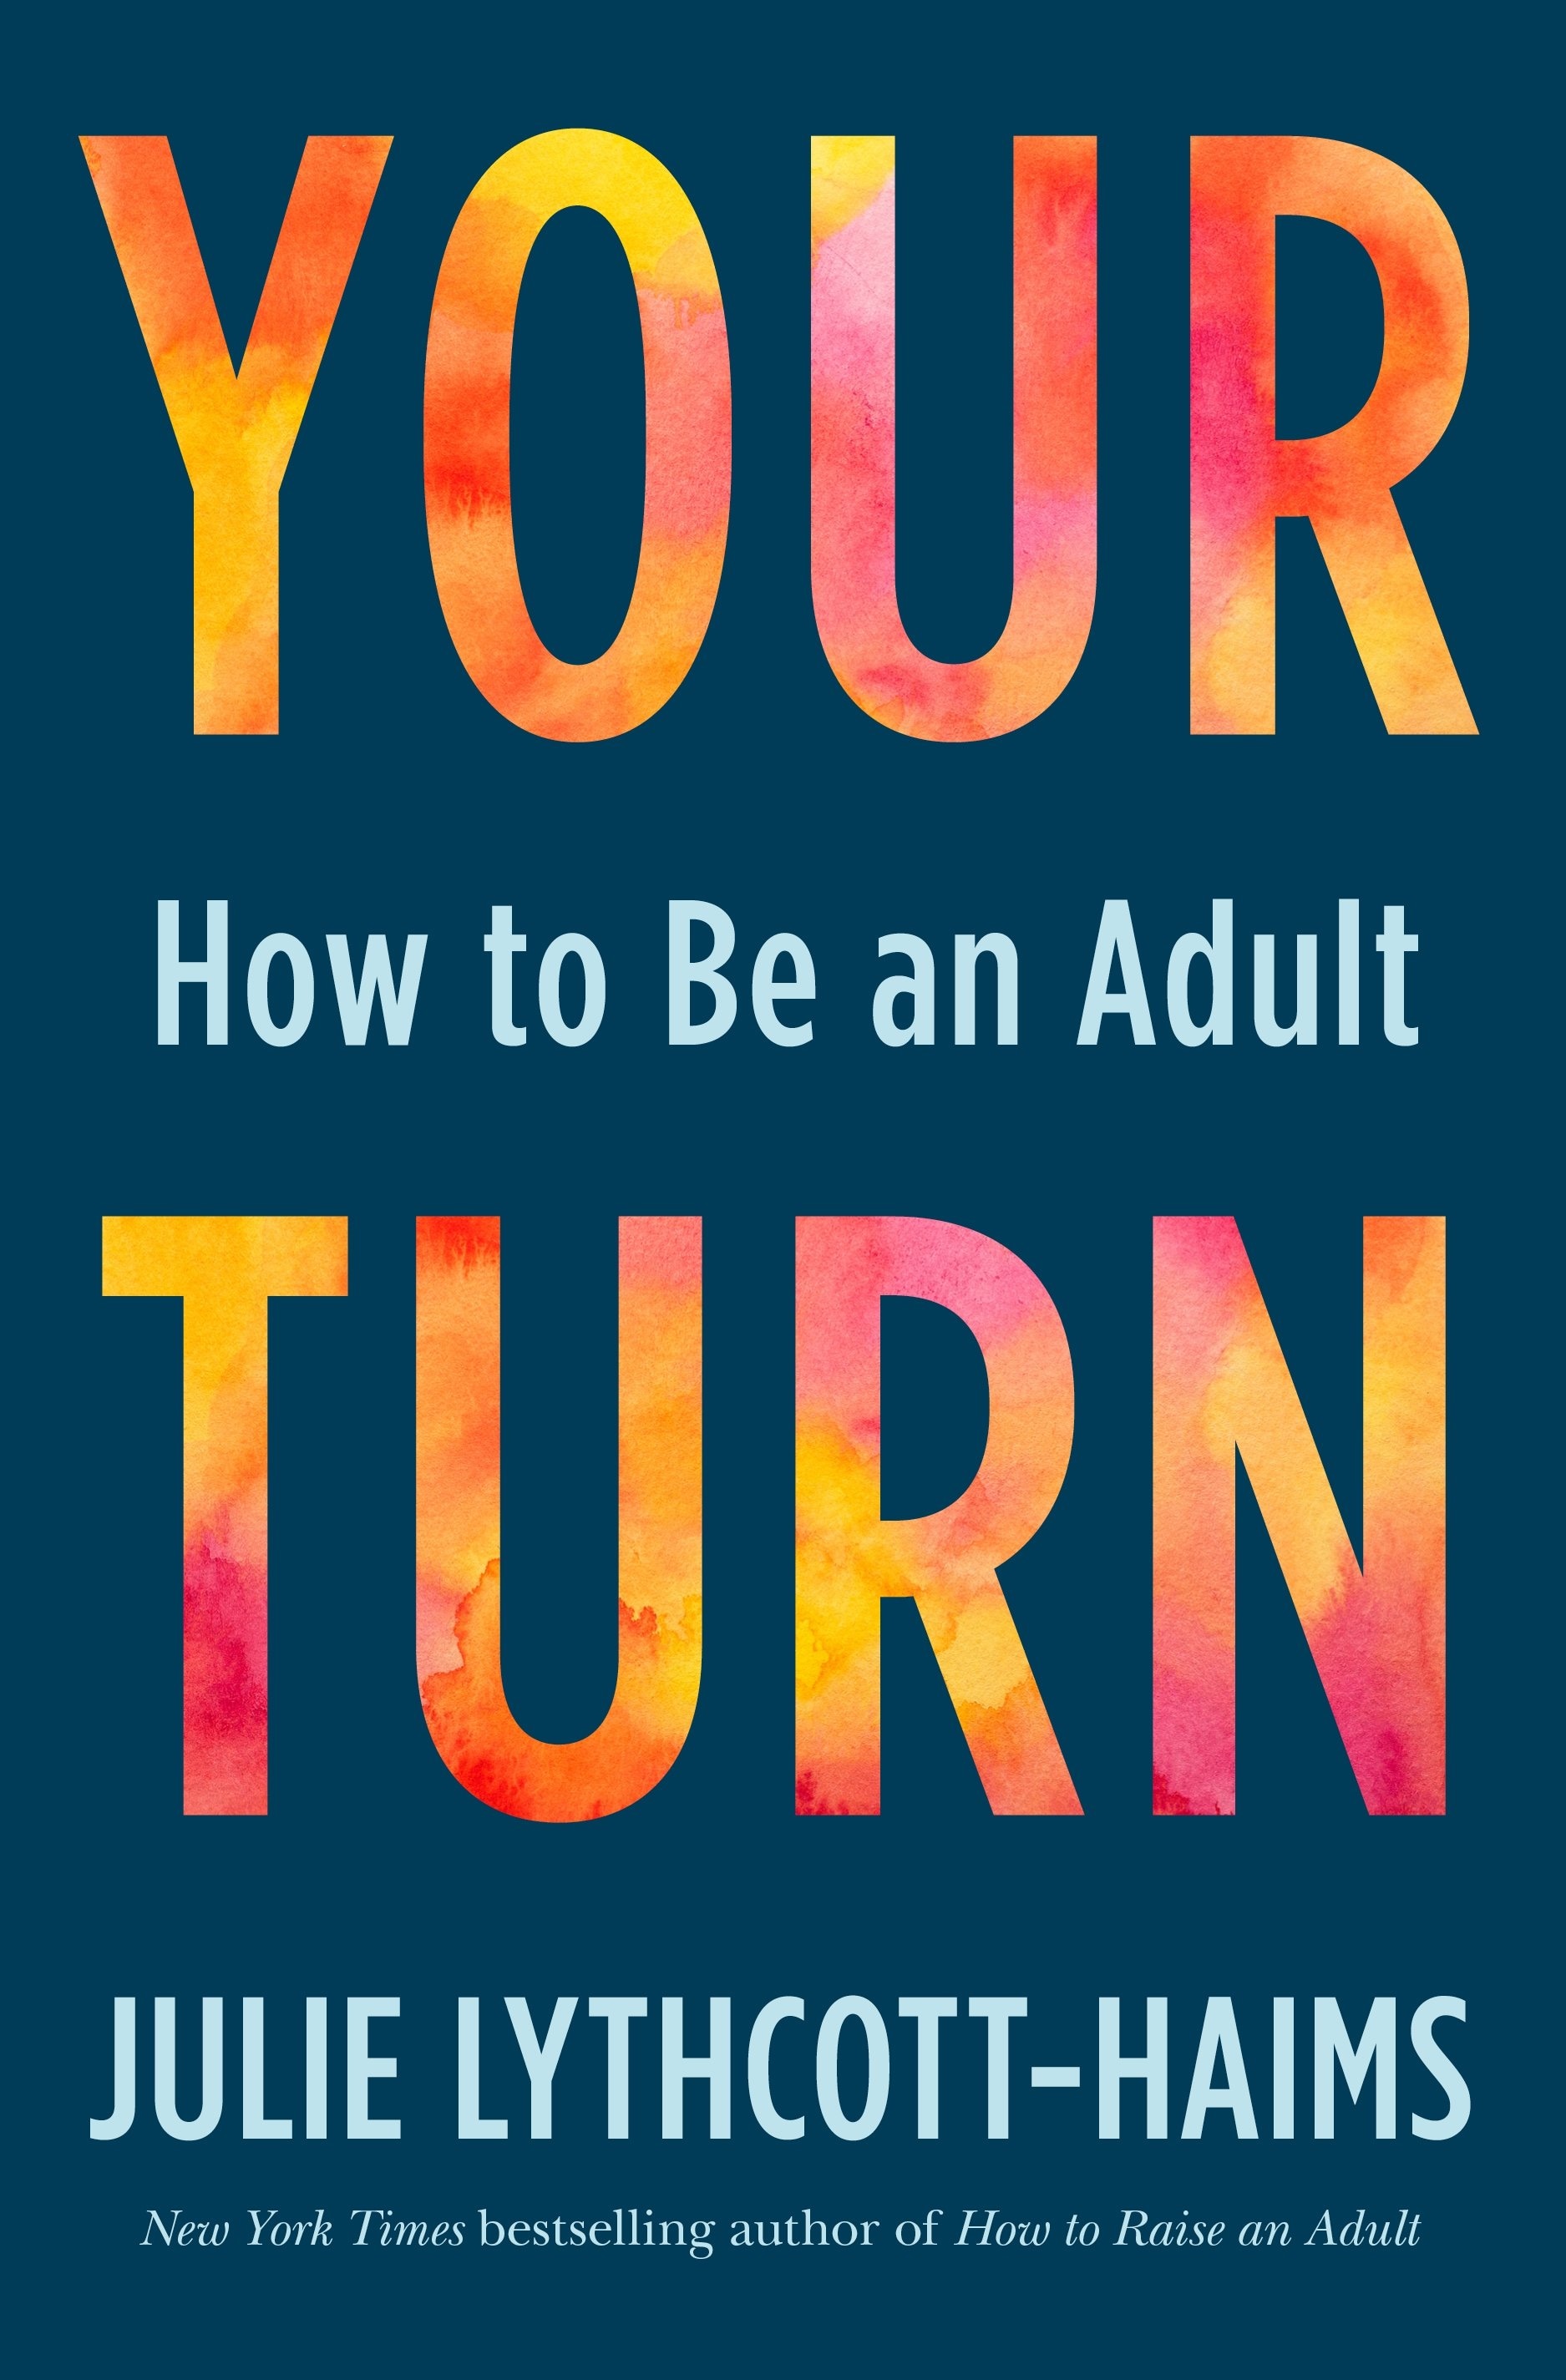 Book “Your Turn” by Julie Lythcott-Haims — April 6, 2021